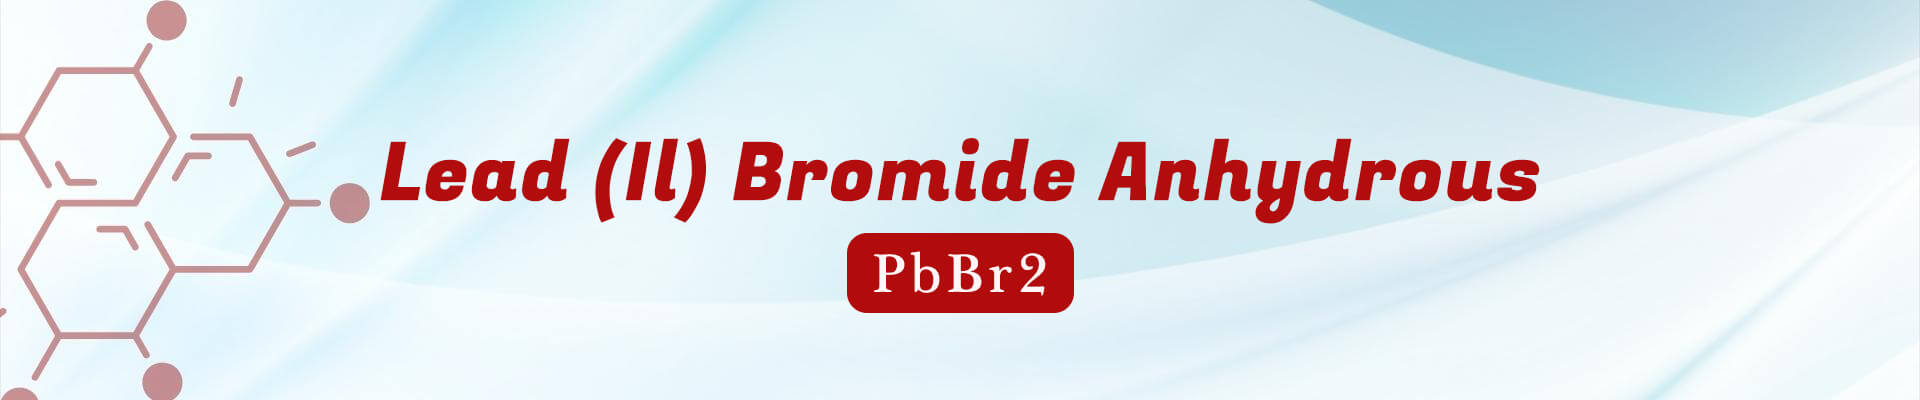 Lead (Il) Bromide Anhydrous